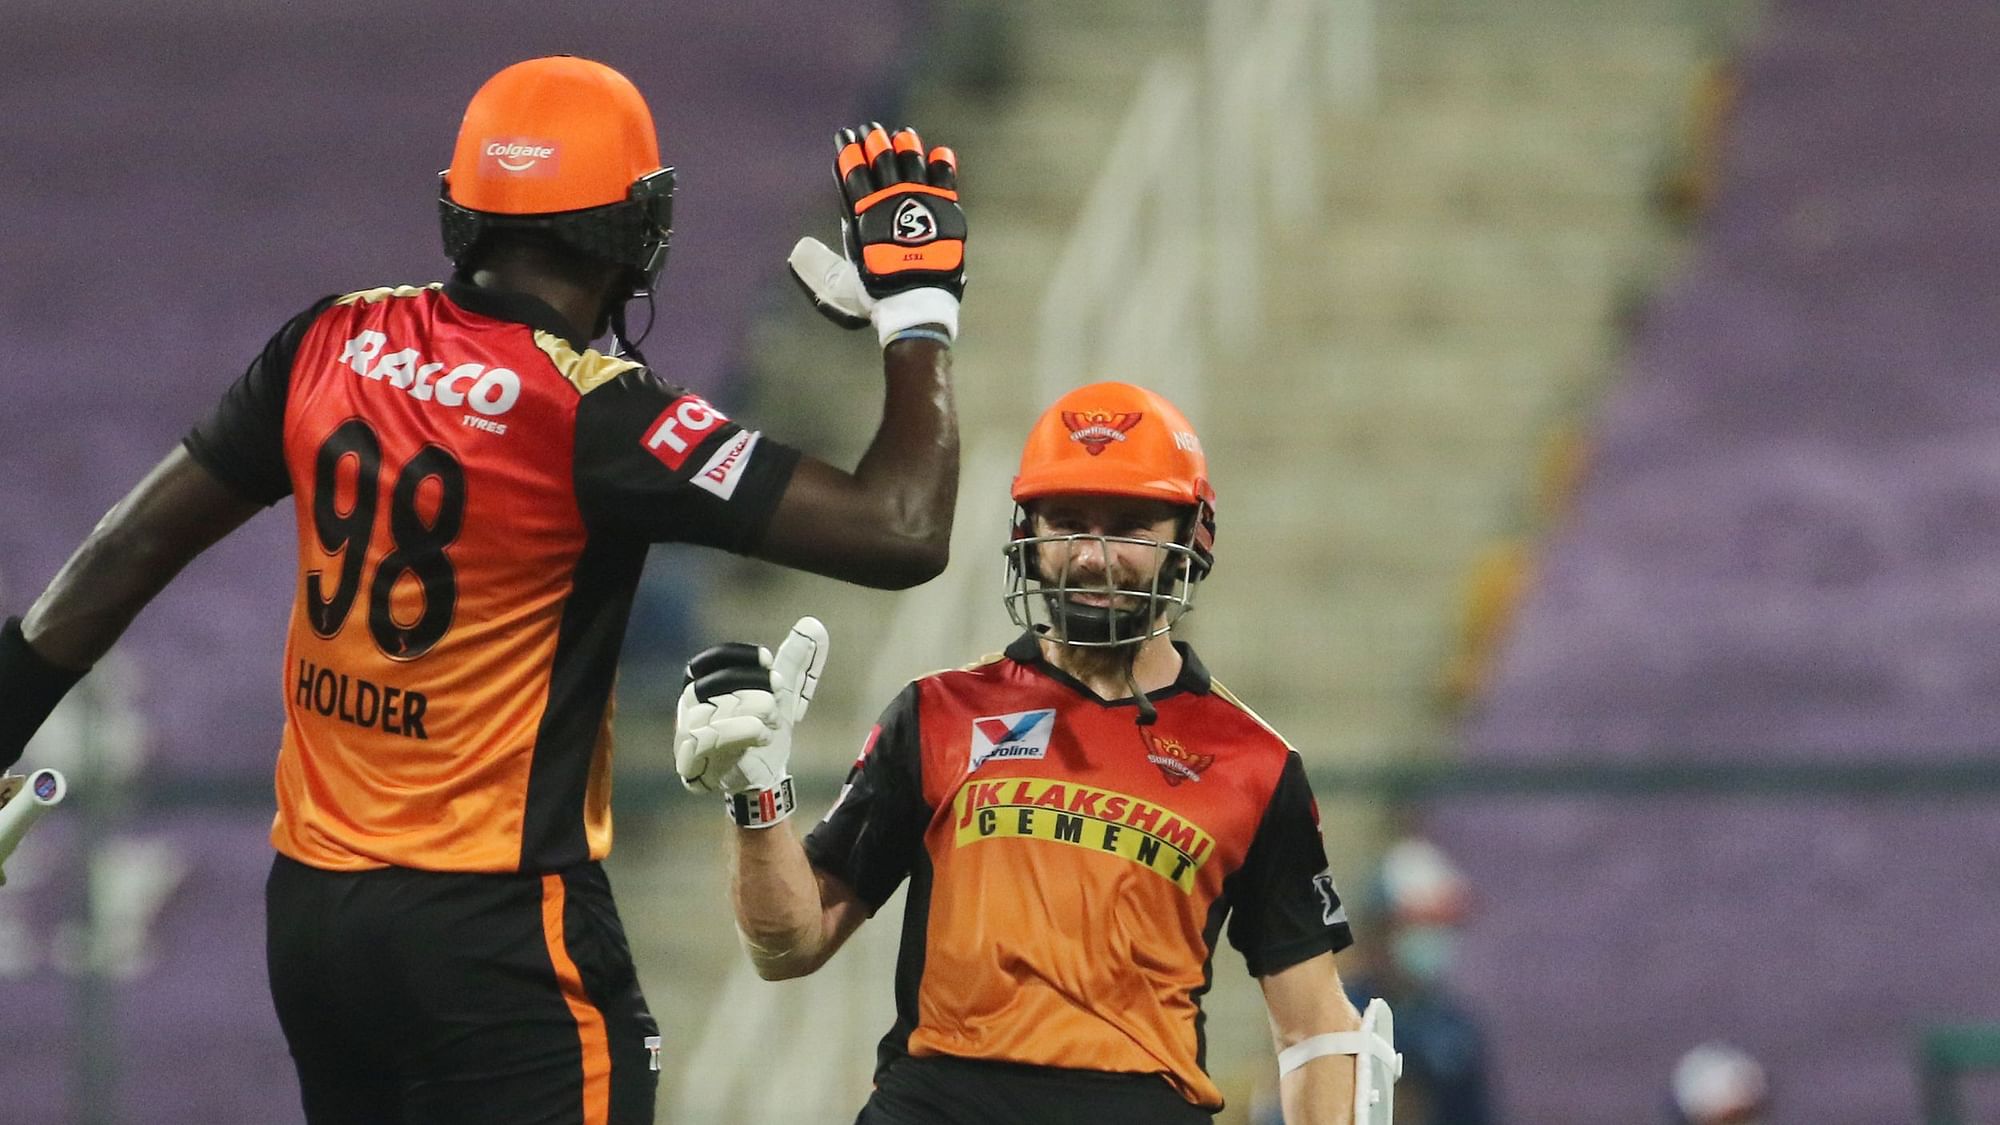 SRH’s skipper David Warner was all praise for Kane Williamson after the team knocked out RCB from IPL 2020.